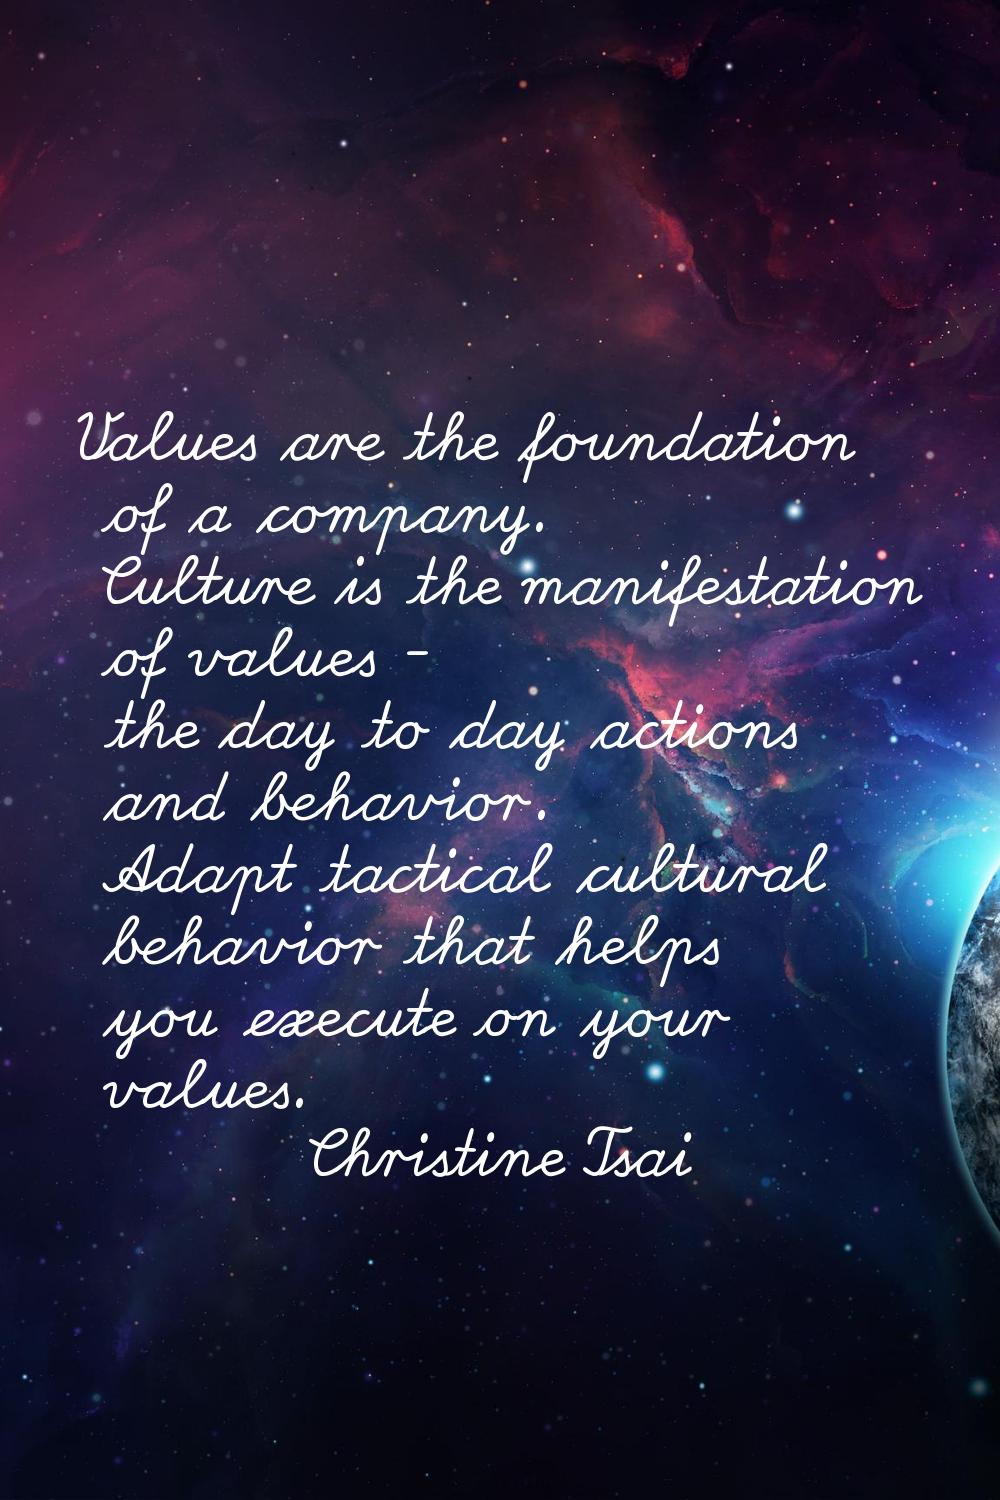 Values are the foundation of a company. Culture is the manifestation of values - the day to day act